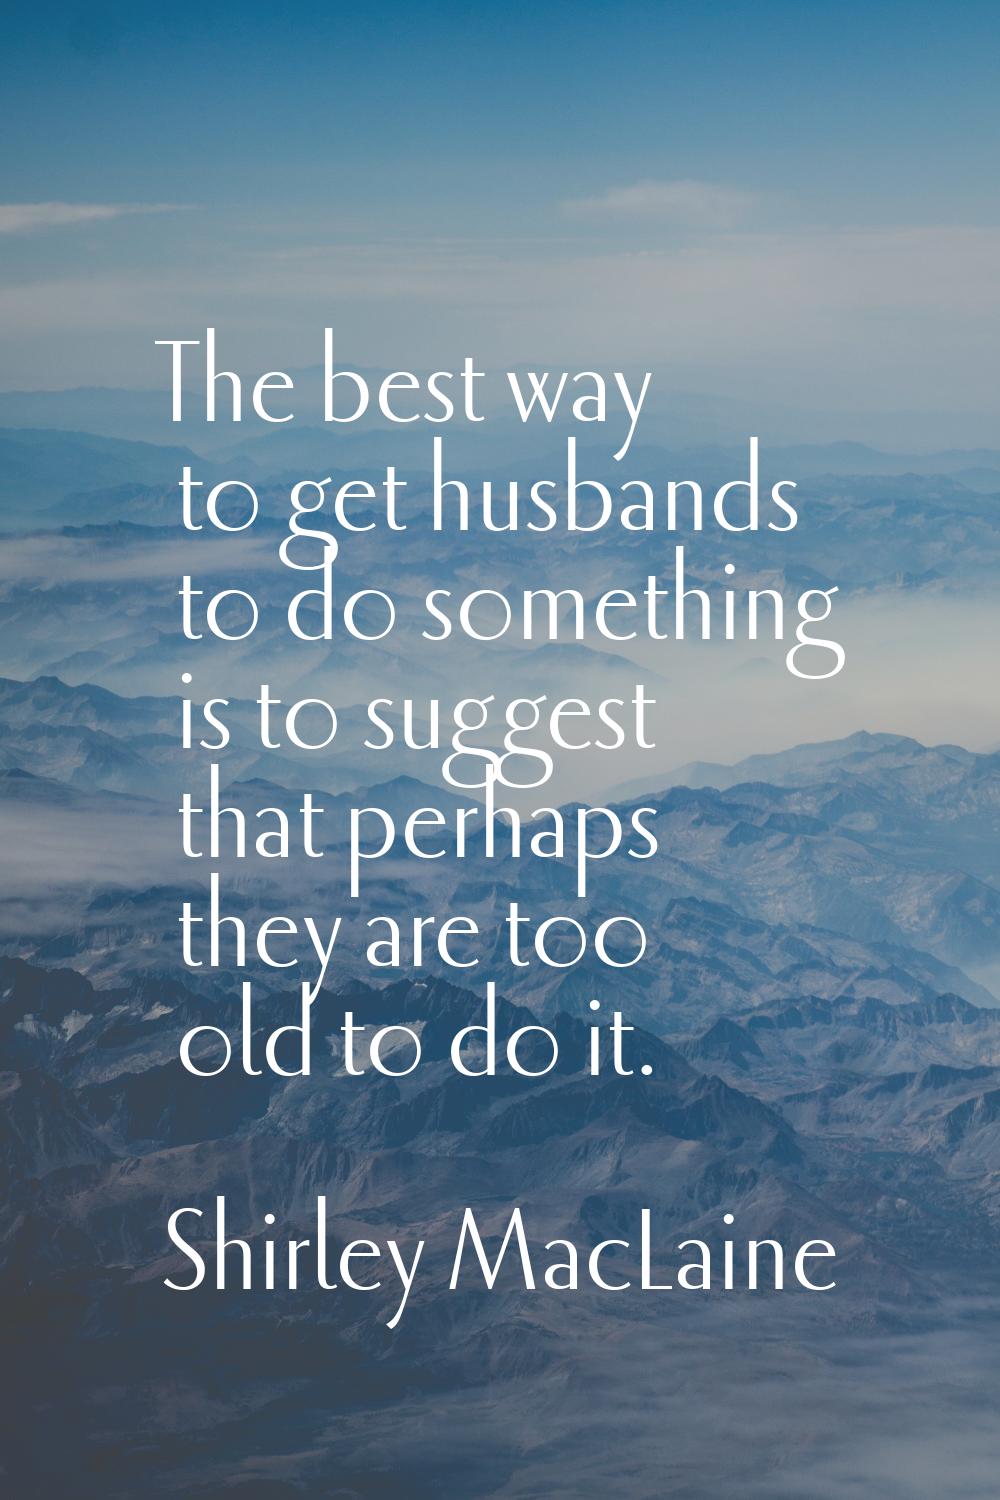 The best way to get husbands to do something is to suggest that perhaps they are too old to do it.